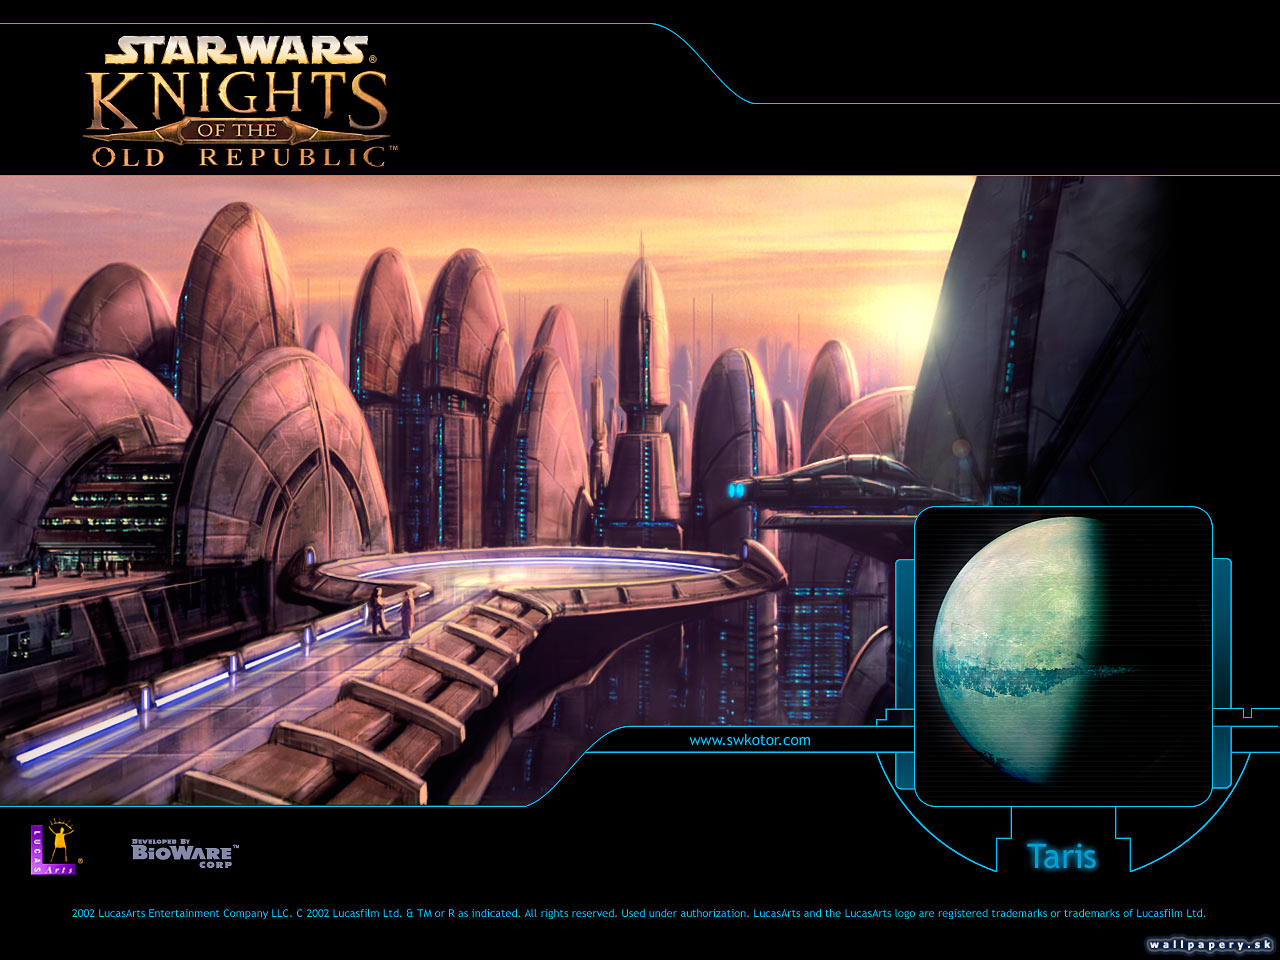 Star Wars: Knights of the Old Republic - wallpaper 10